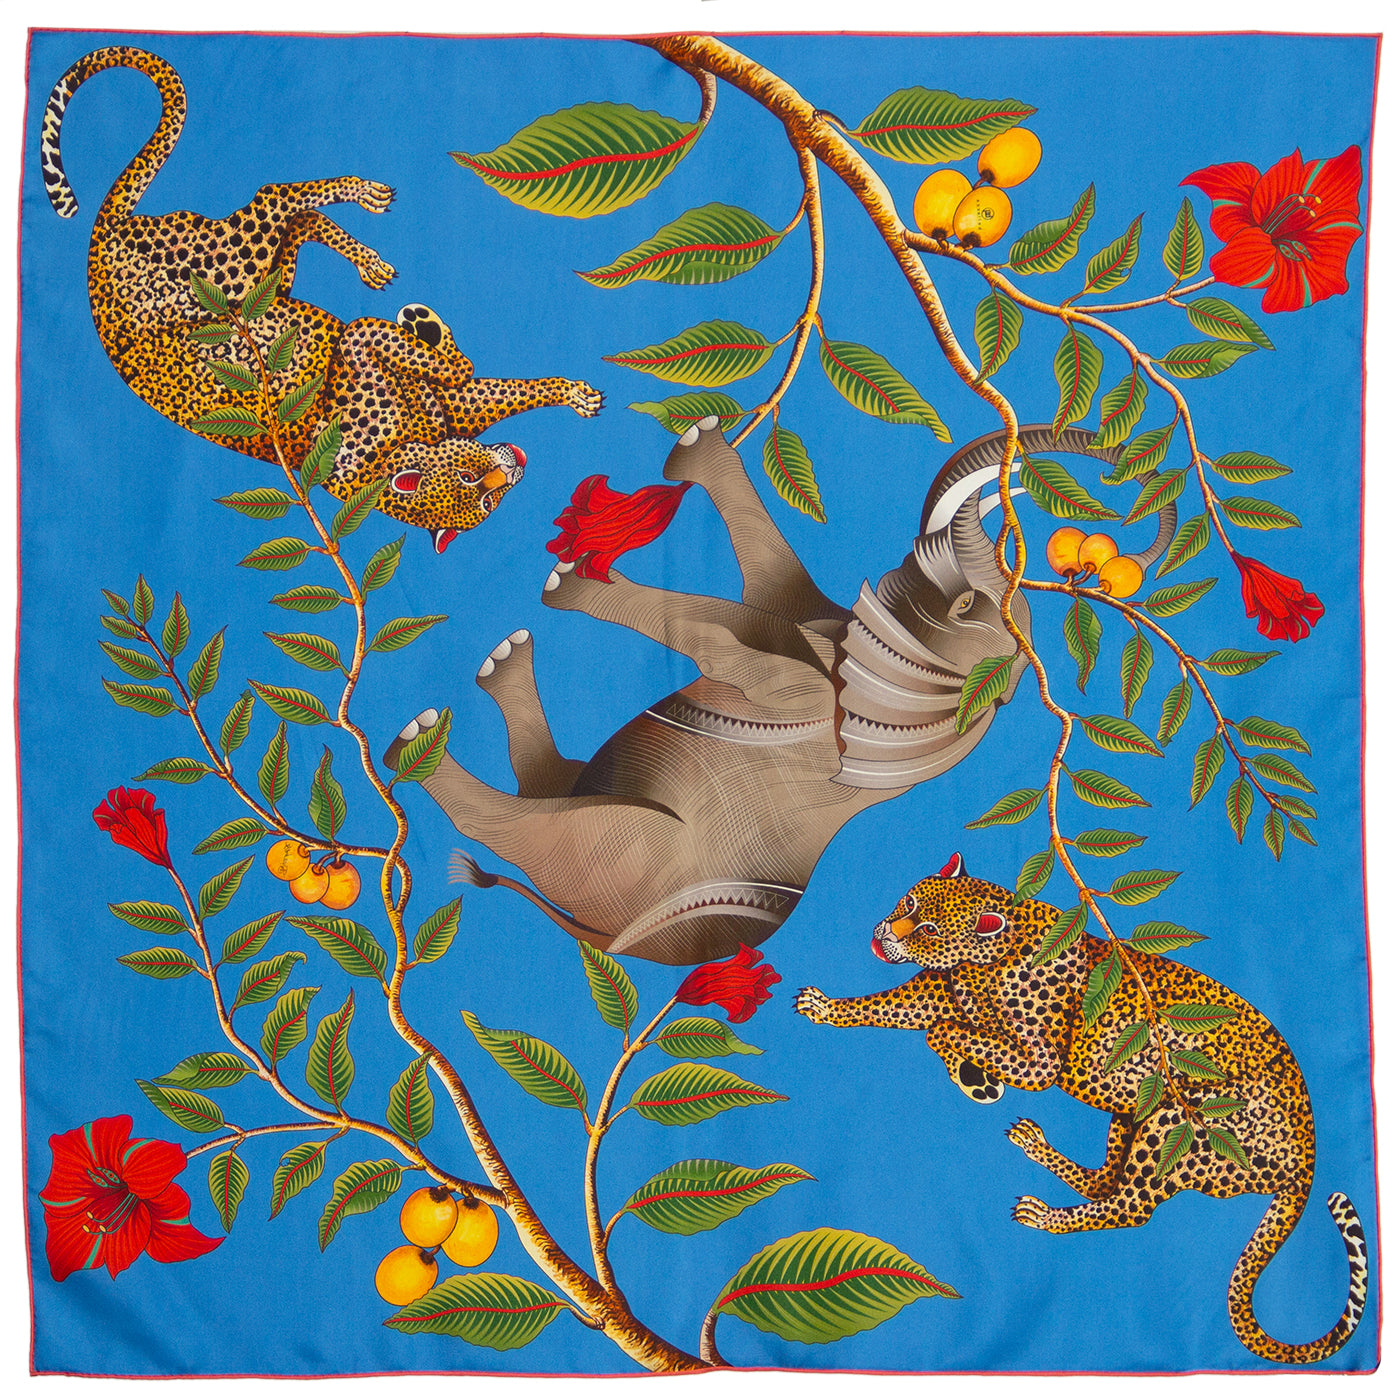 Turquoise & blue silk scarf with Elephant Leopard & red flowers